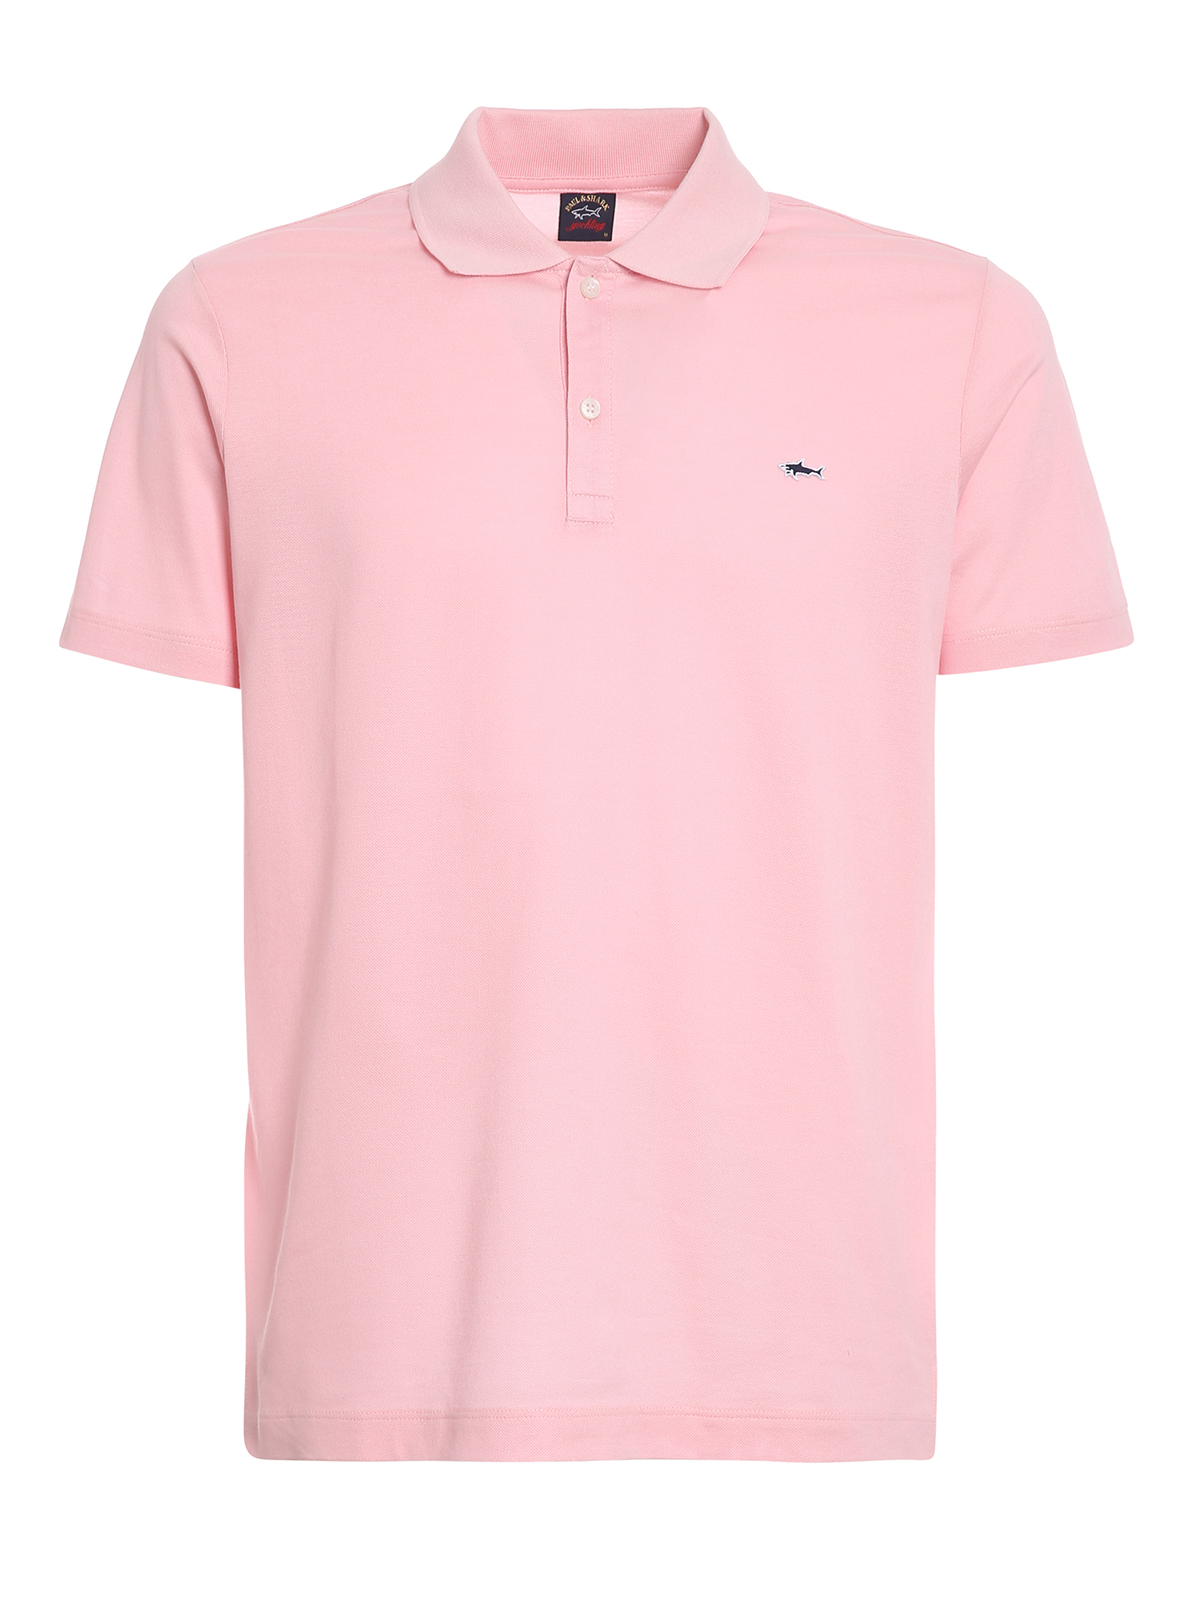 once again latitude Compressed Paul & Shark Chest Shark Logo Piquet Polo In Pink | ModeSens